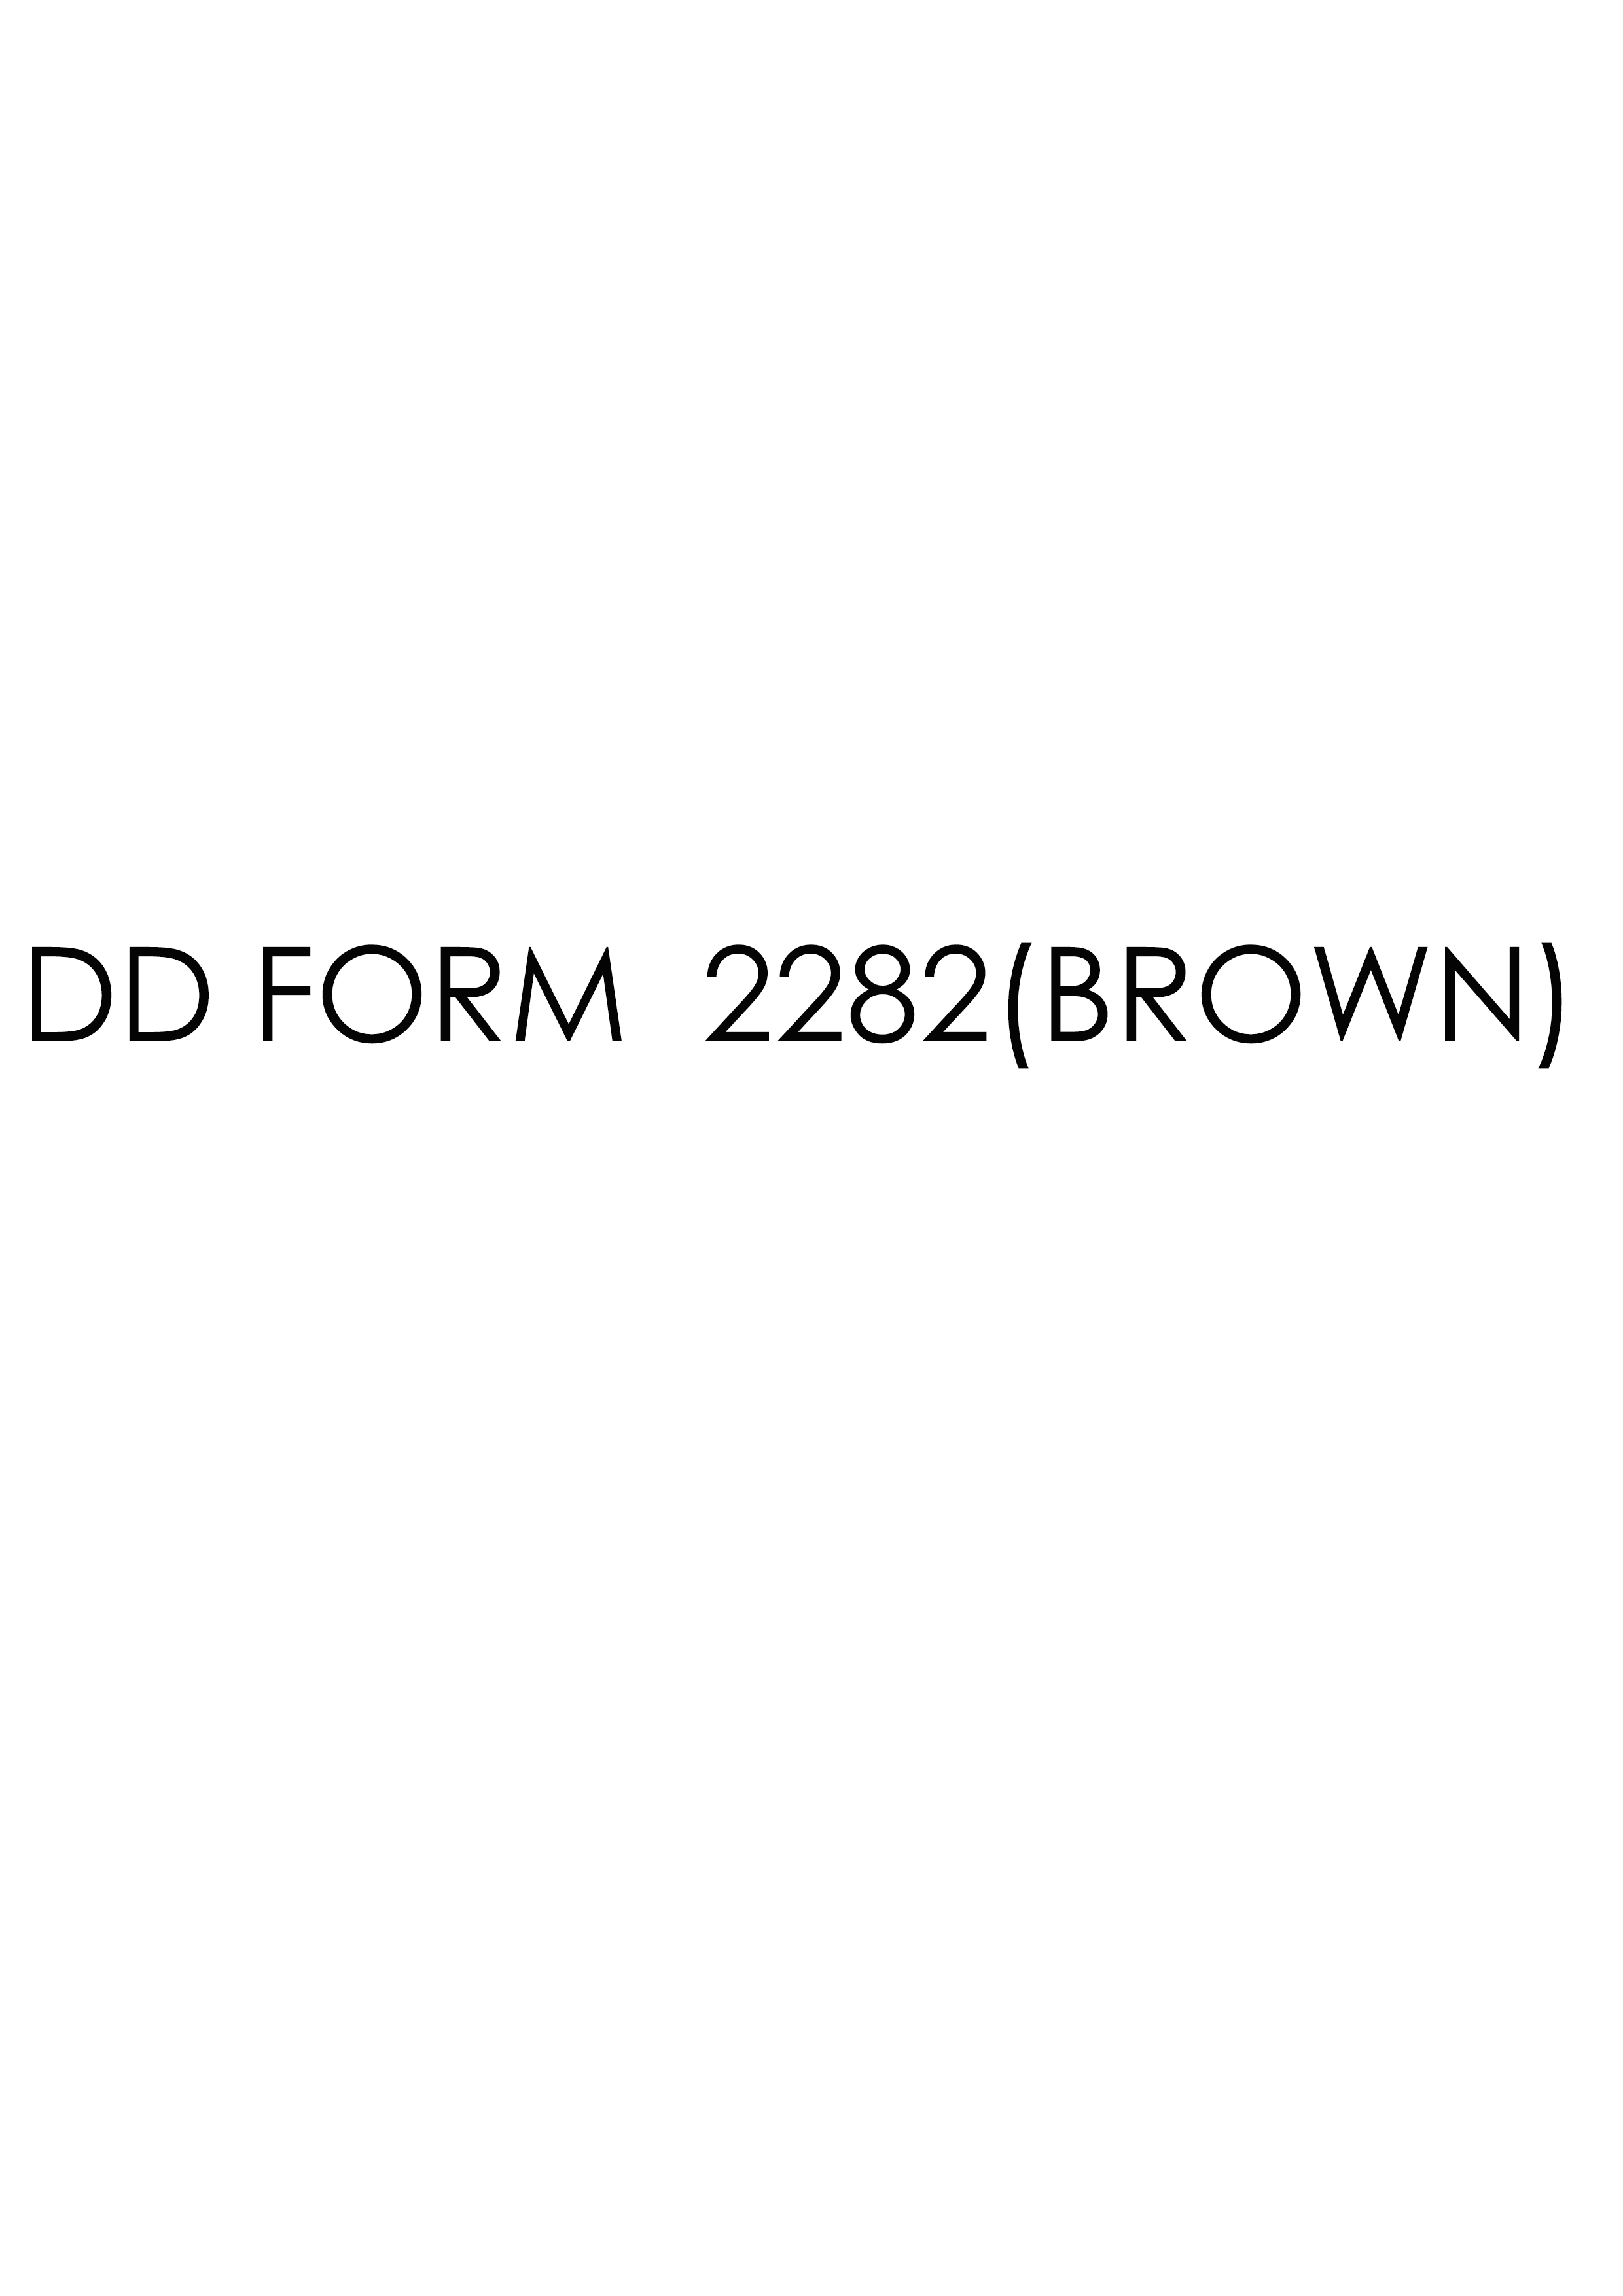 Download Fillable dd Form 2282(BROWN)